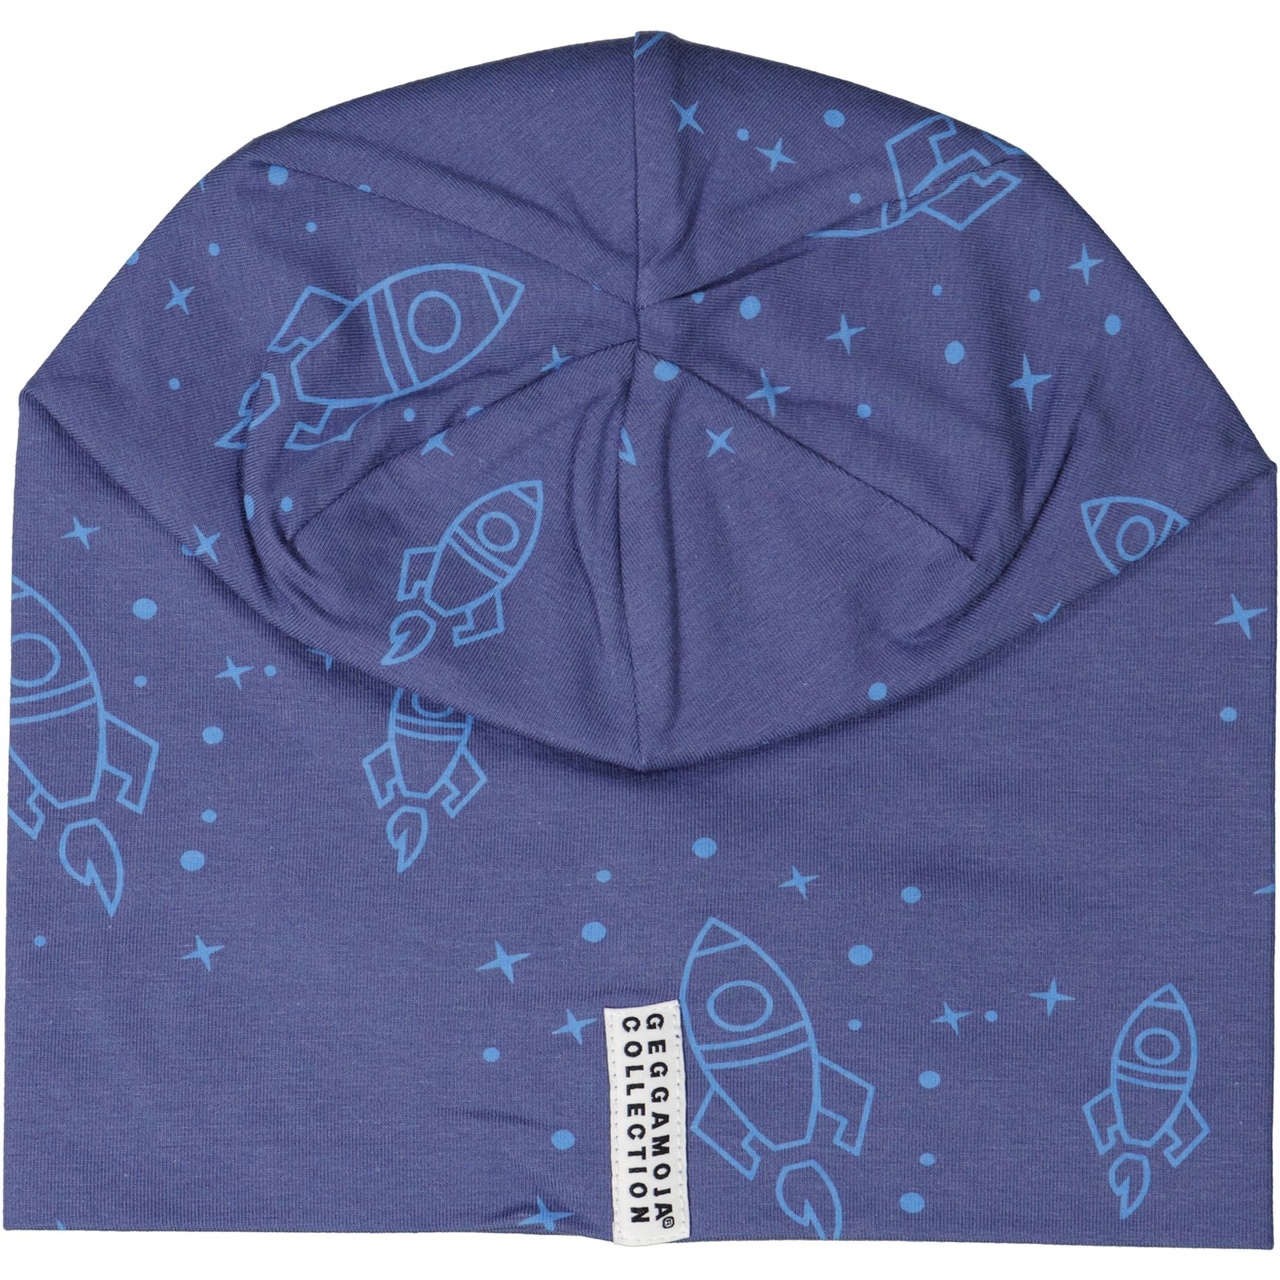 Bamboo cap Blue space XS 1-2 Year